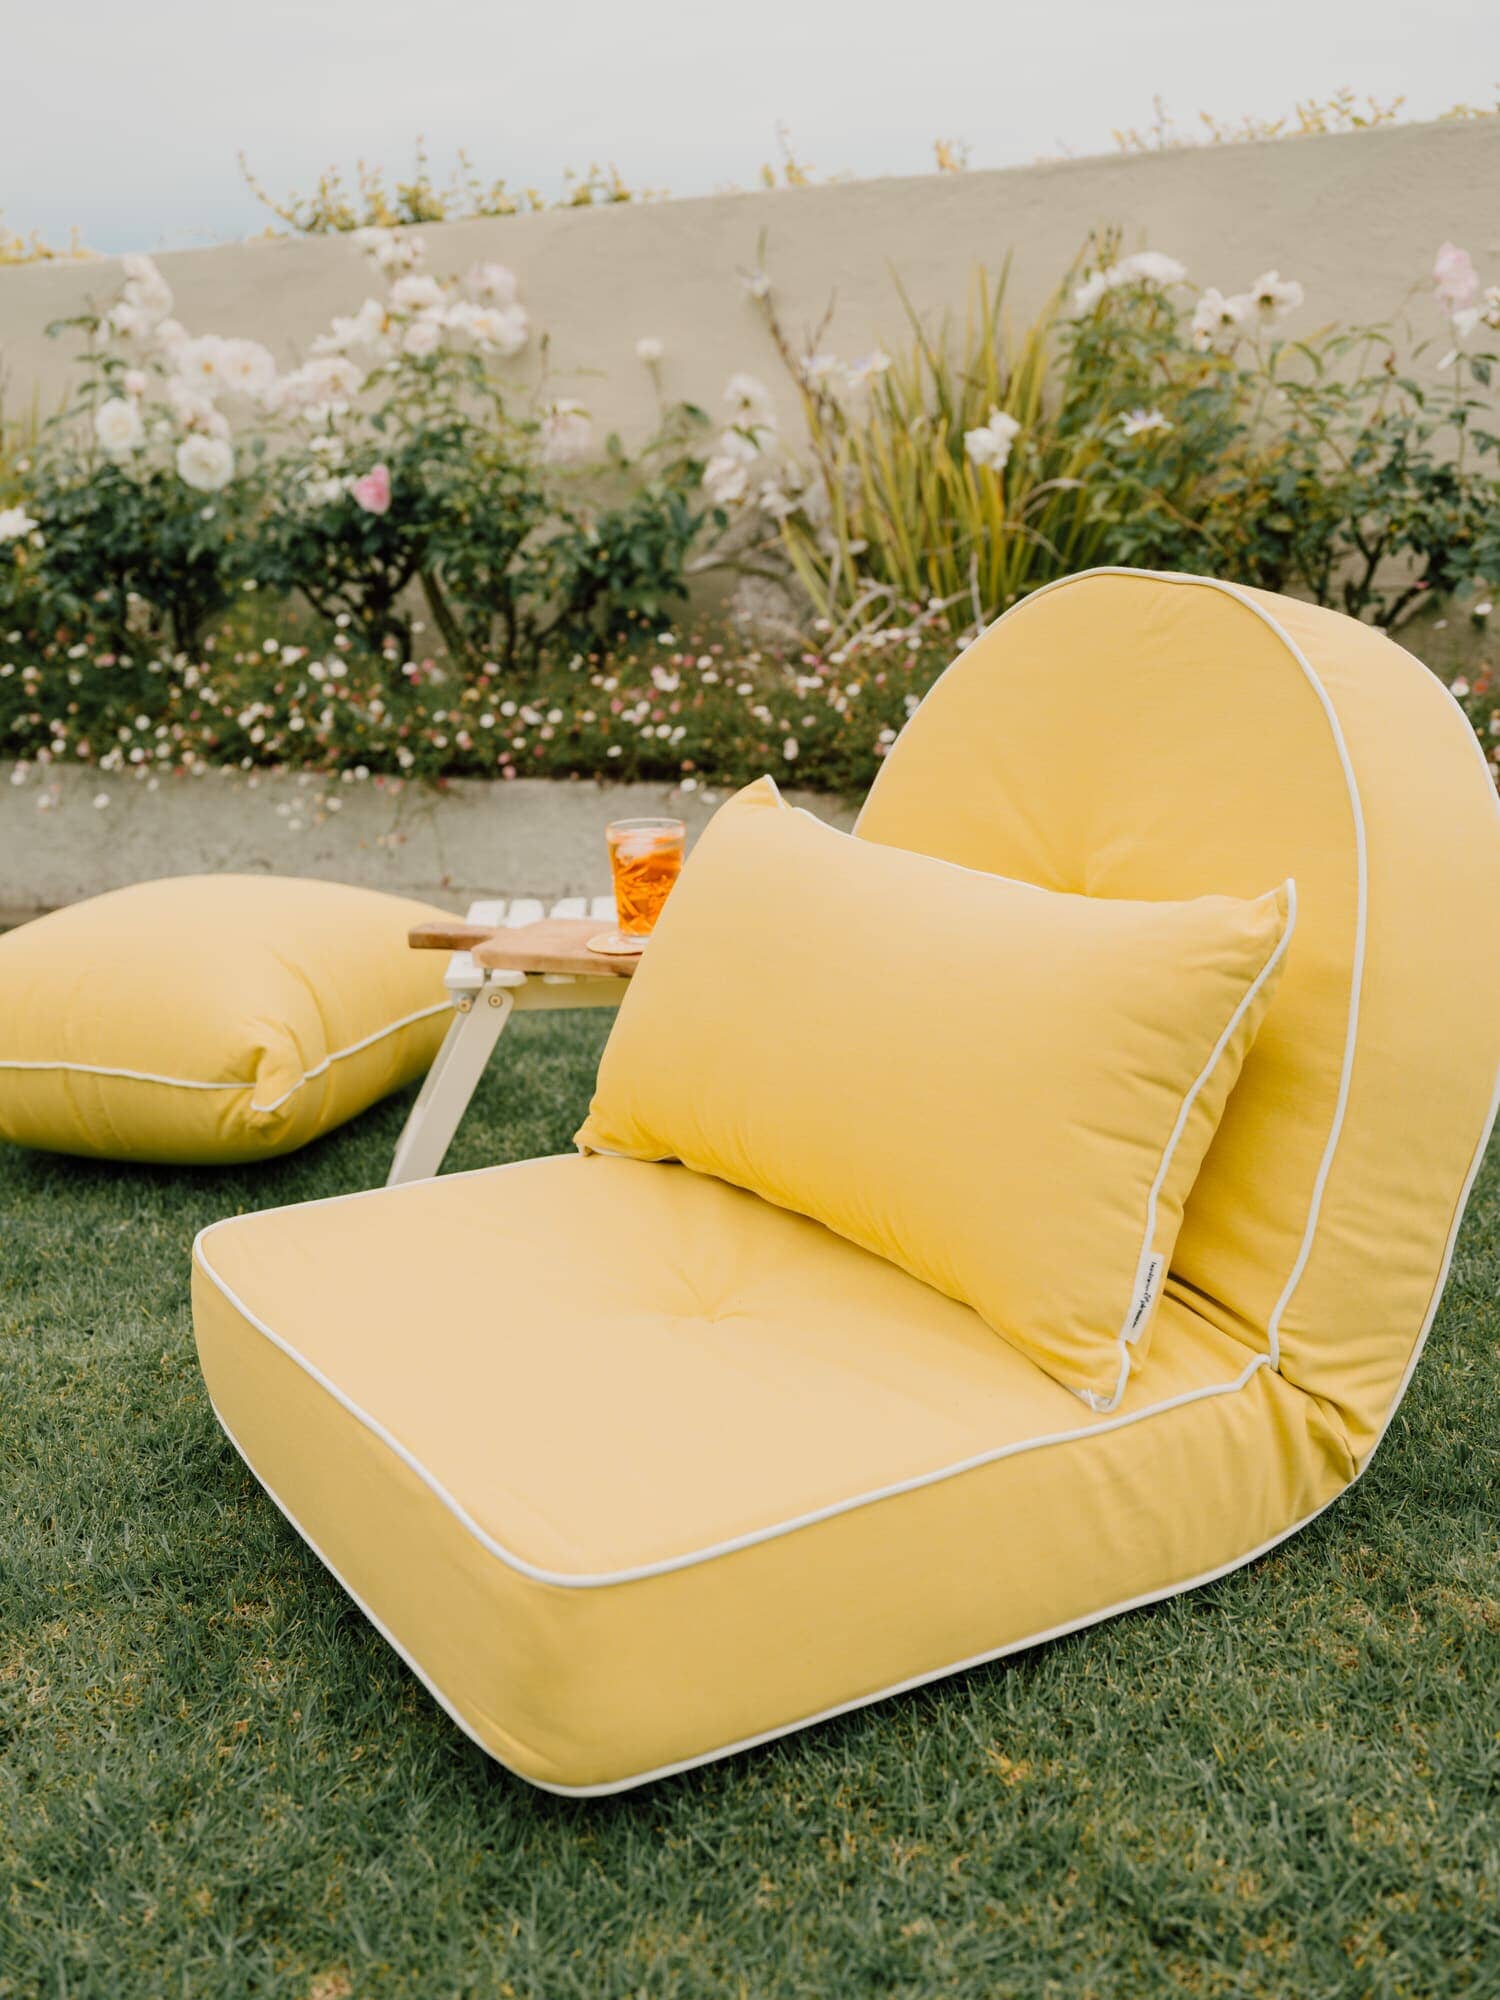 Riviera mimosa throe pillow on a reclining lounger in a garden setting